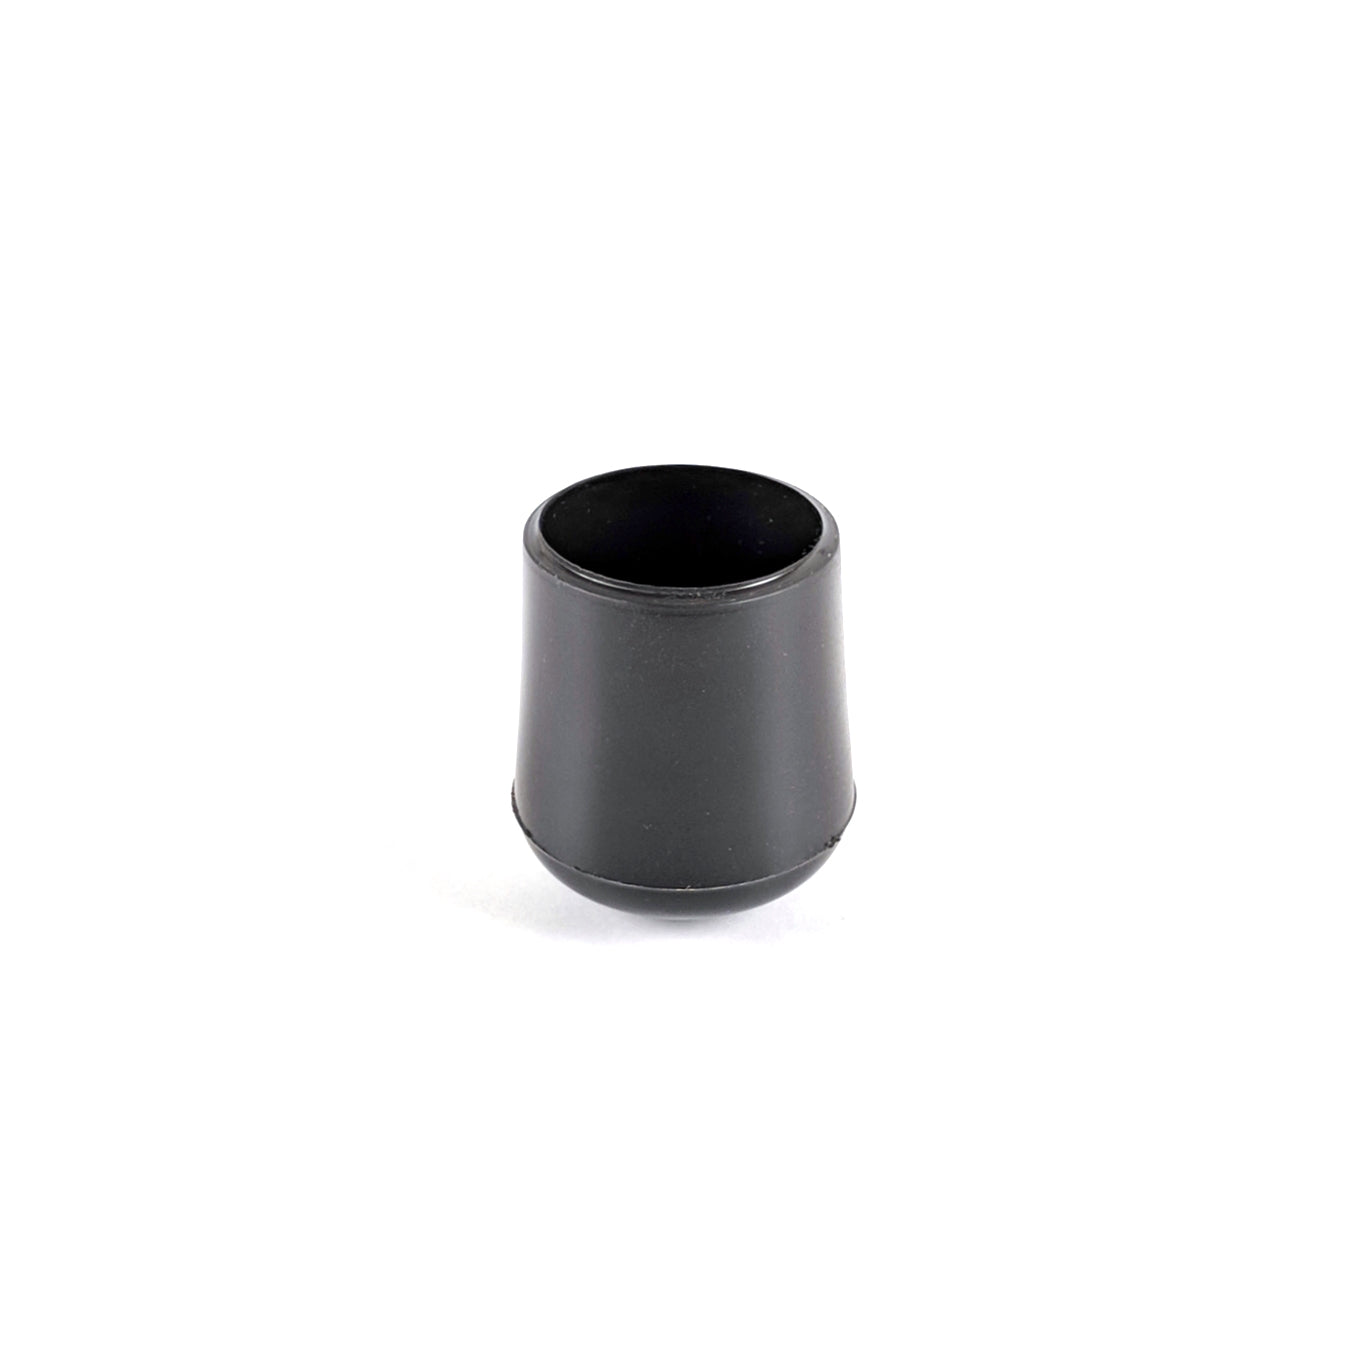 25mm Black Rubber Ferrules with Steel Base Insert - Made in Germany - Keay Vital Parts